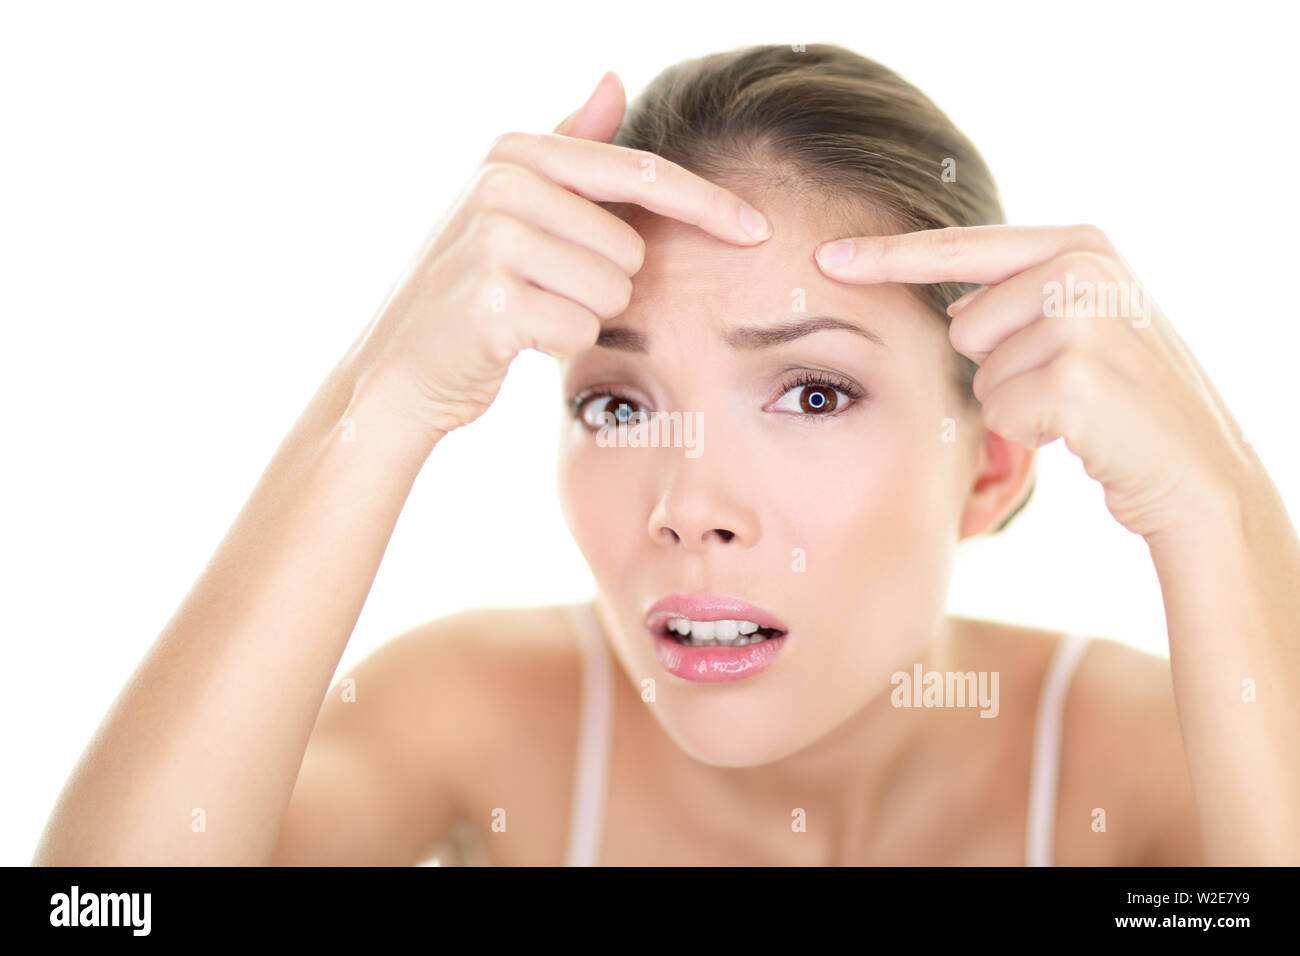 Acne spot pimple spot skincare beauty care girl pressing on skin problem face. Woman with skin blemish looking at mirror isolated white background. Beautiful young Asian Caucasian female model. Stock Photo